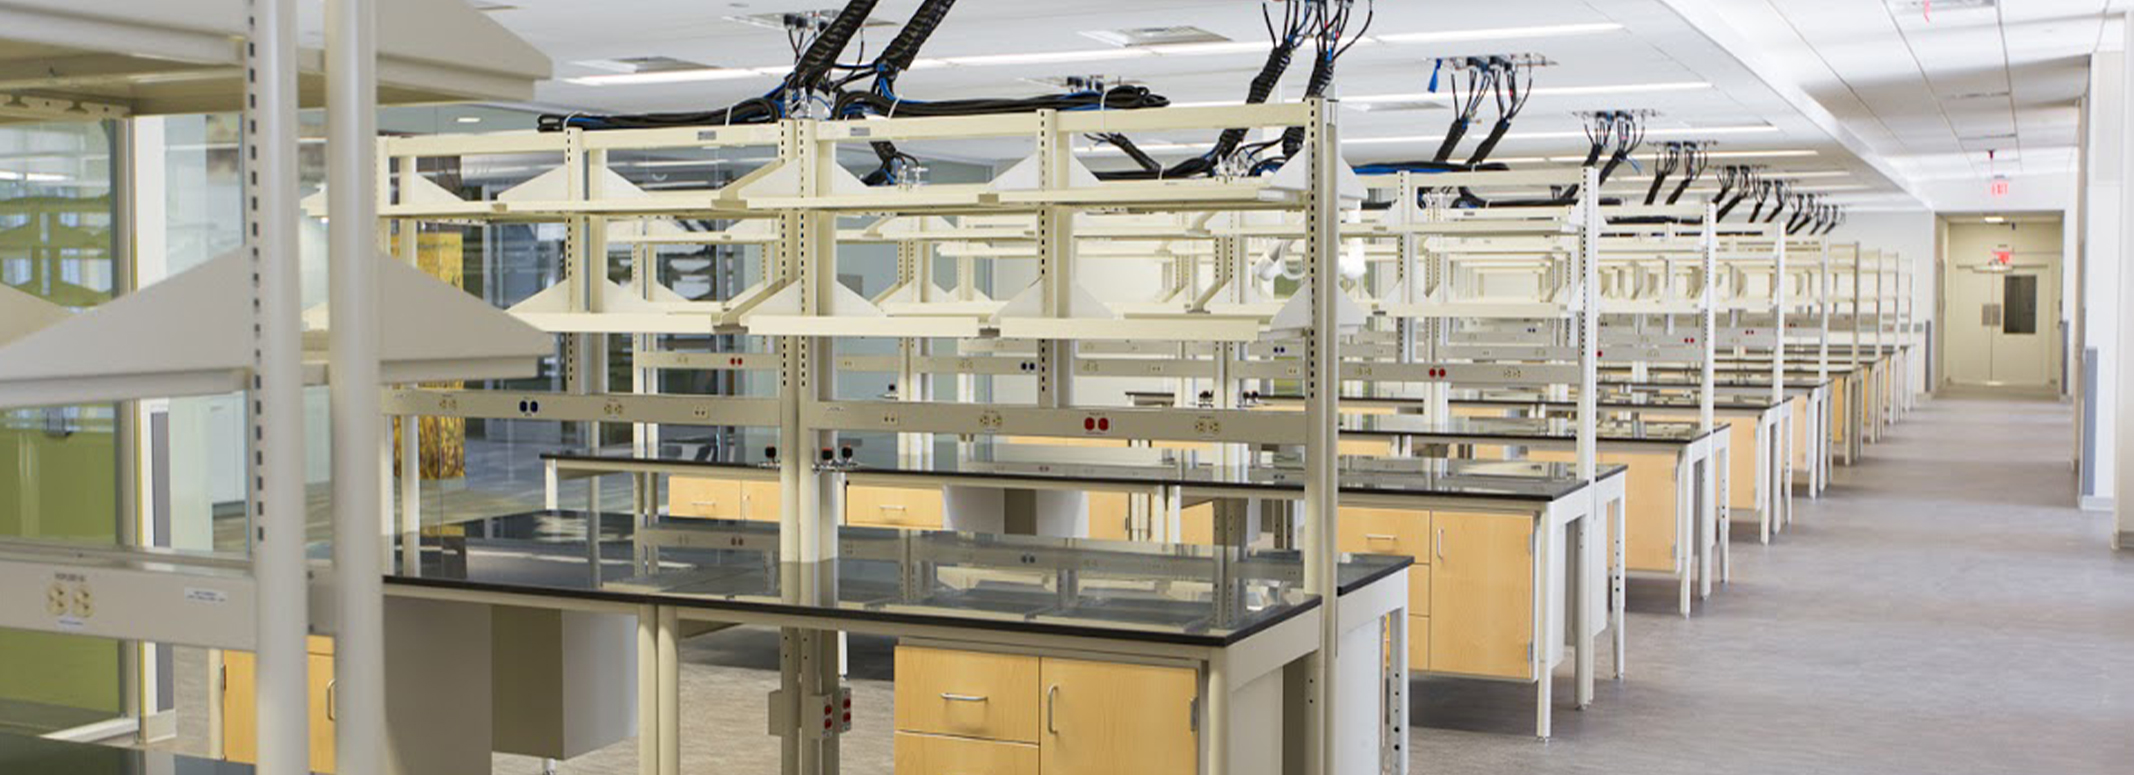 35 North Provides Construction and Project Management Services to Syngenta's Laboratory Renovations in Durham, NC